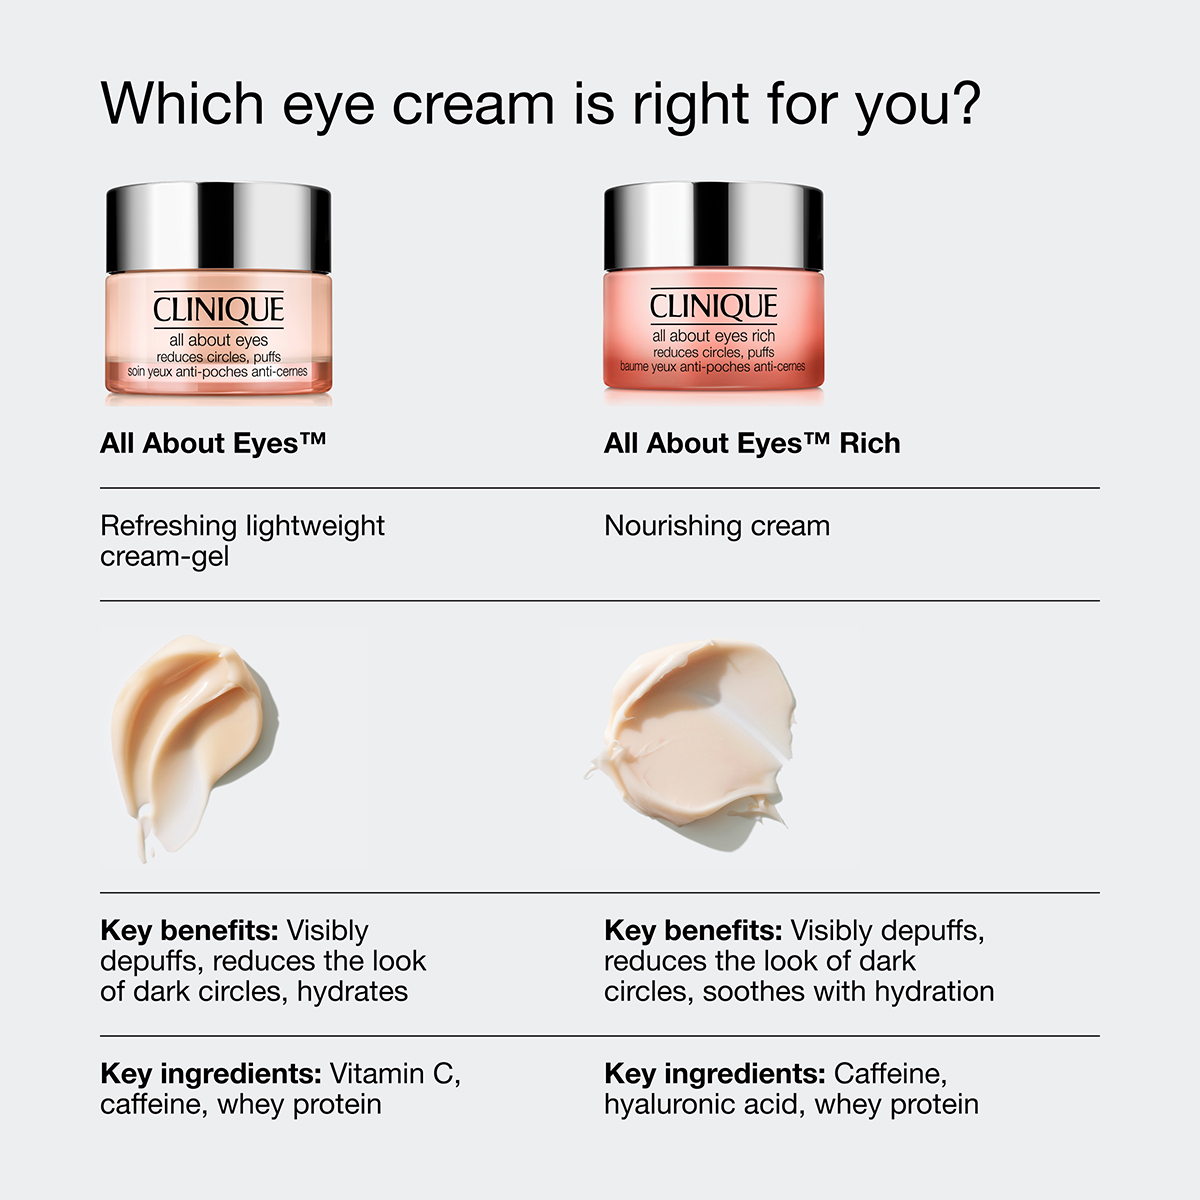 Clinique All About Eyes(tm) Eye Cream